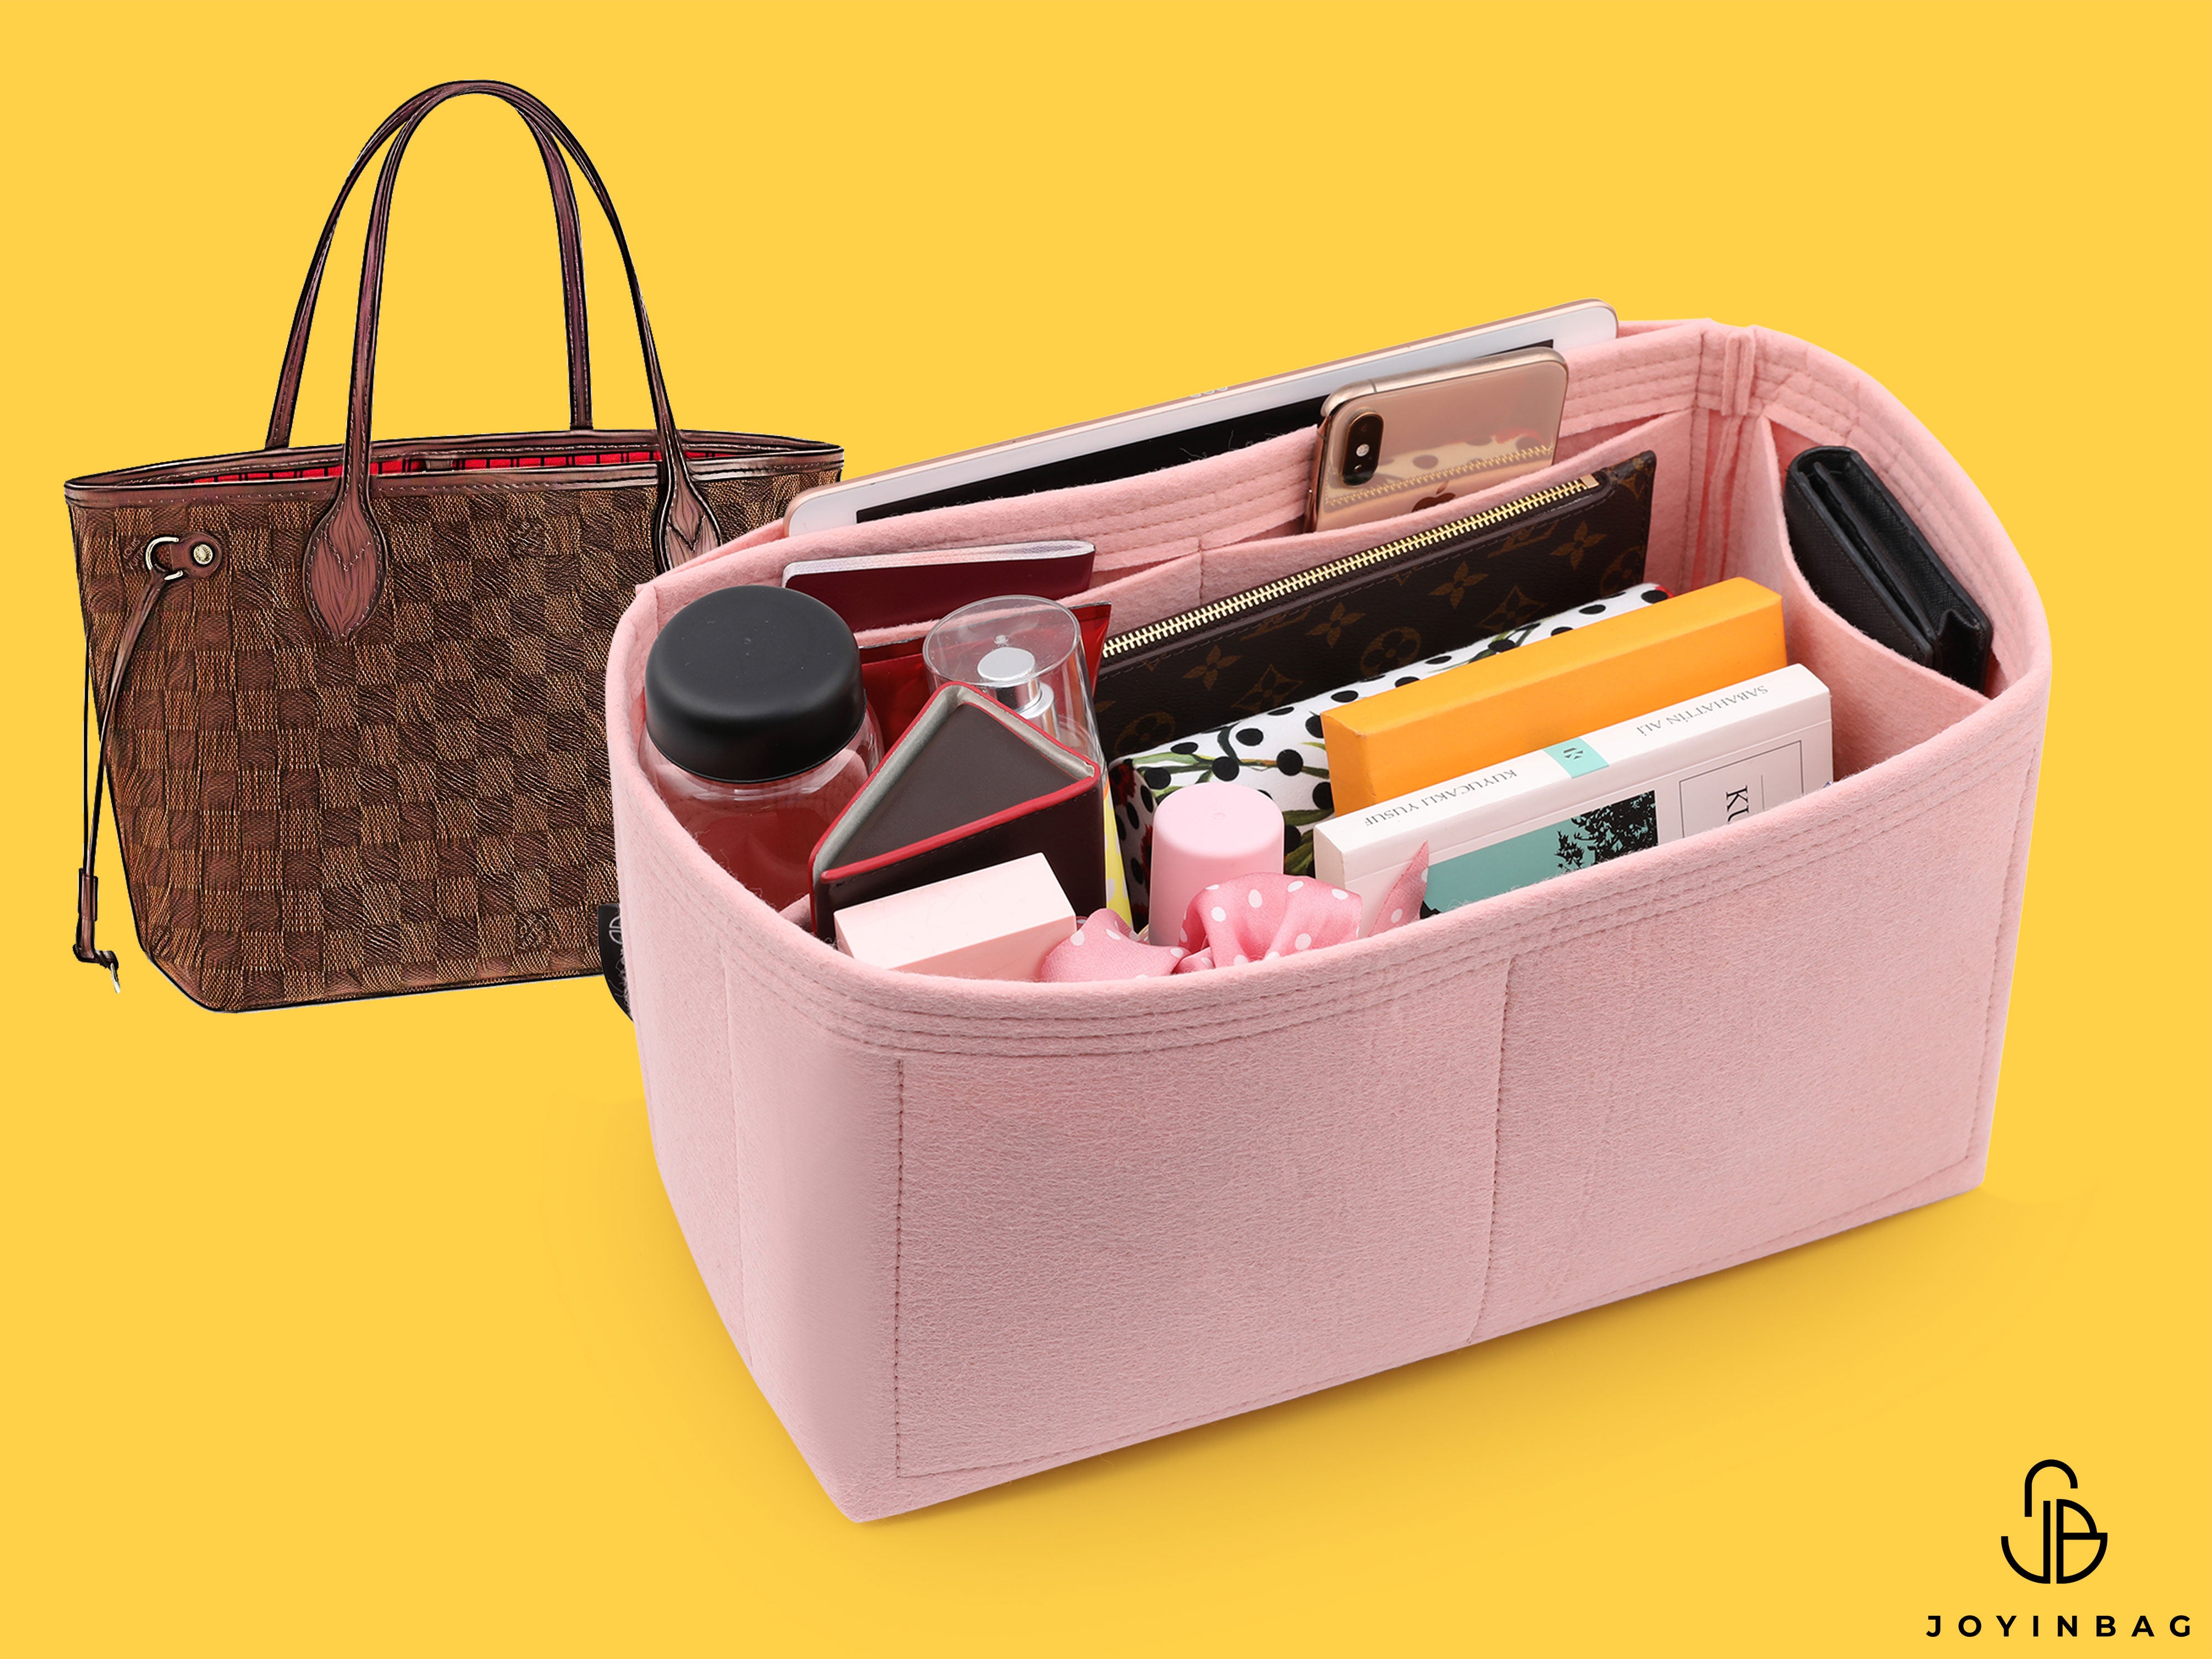 How to choose a bag organizer for your Louis Vuitton Neverfull